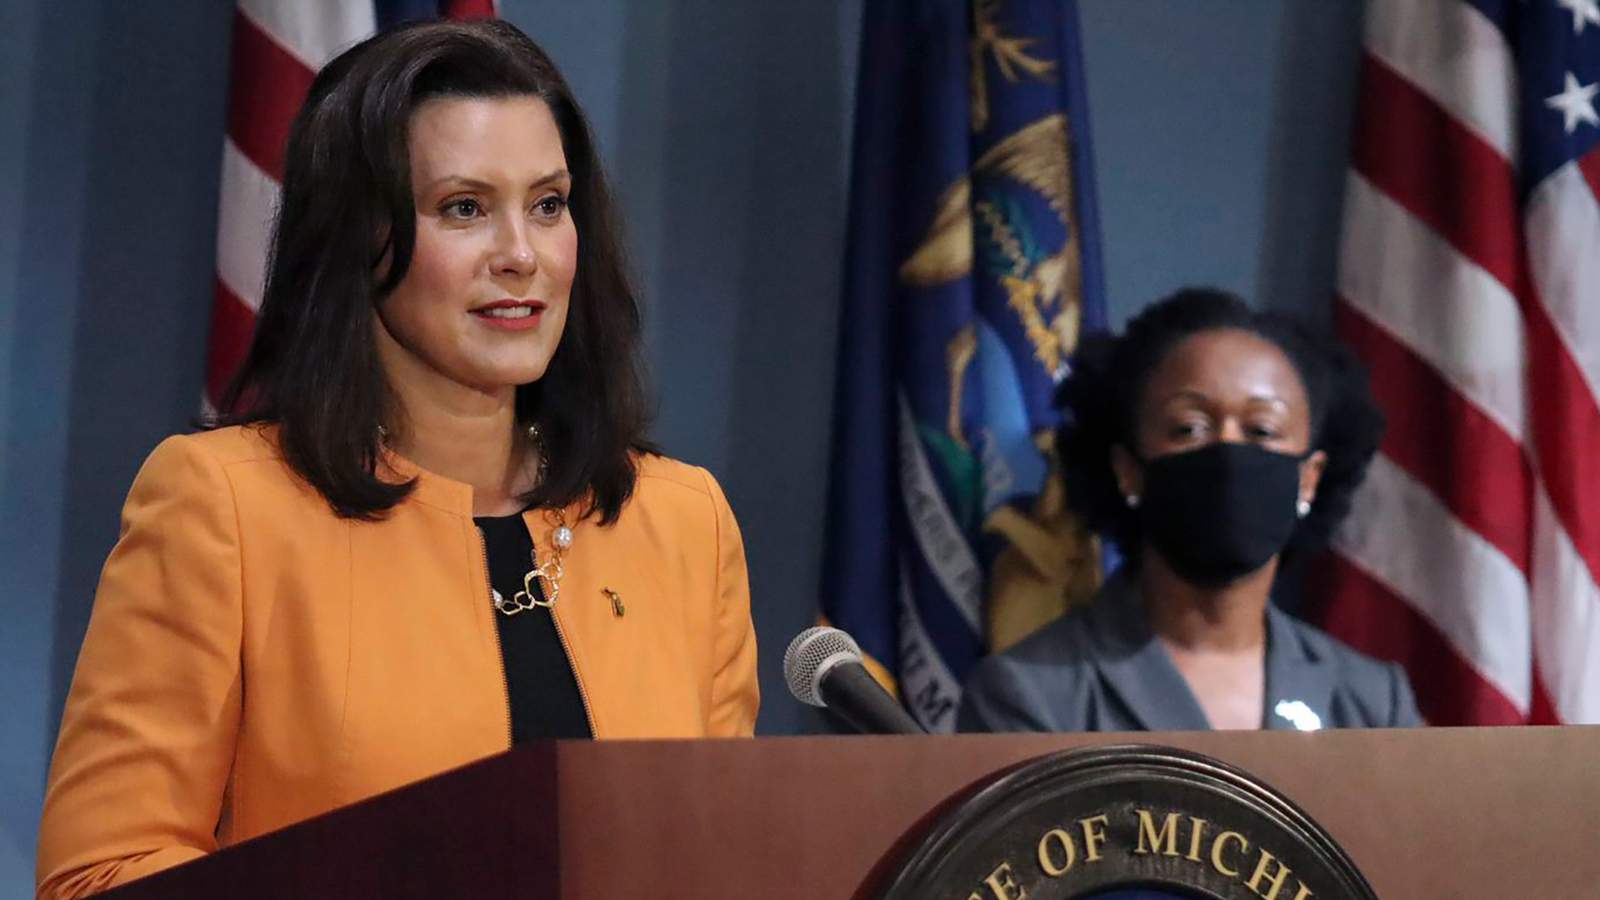 Gov. Whitmer preparing to announce plan to reopen Michigan gyms, movie theaters